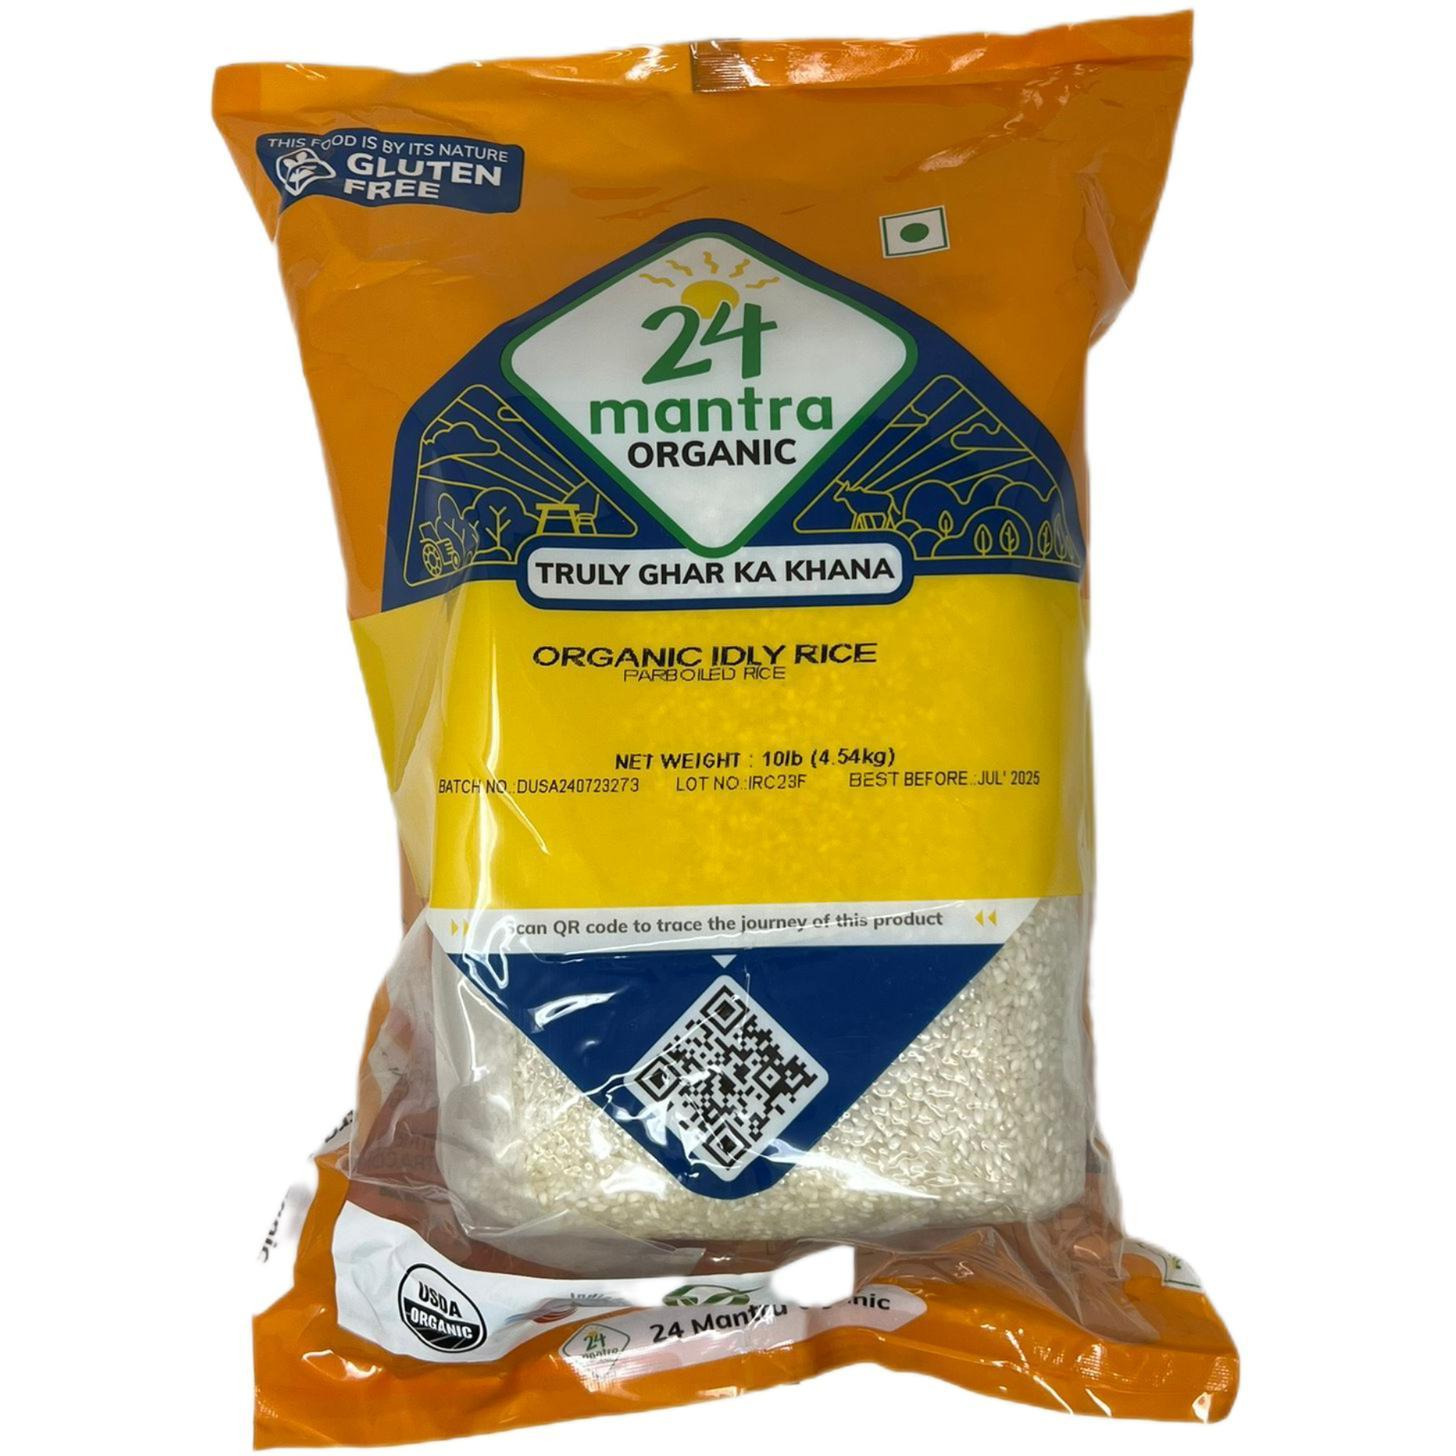 Case of 4 - 24 Mantra Organic Idly Rice Parboiled - 10 Lb (4.5 Kg)